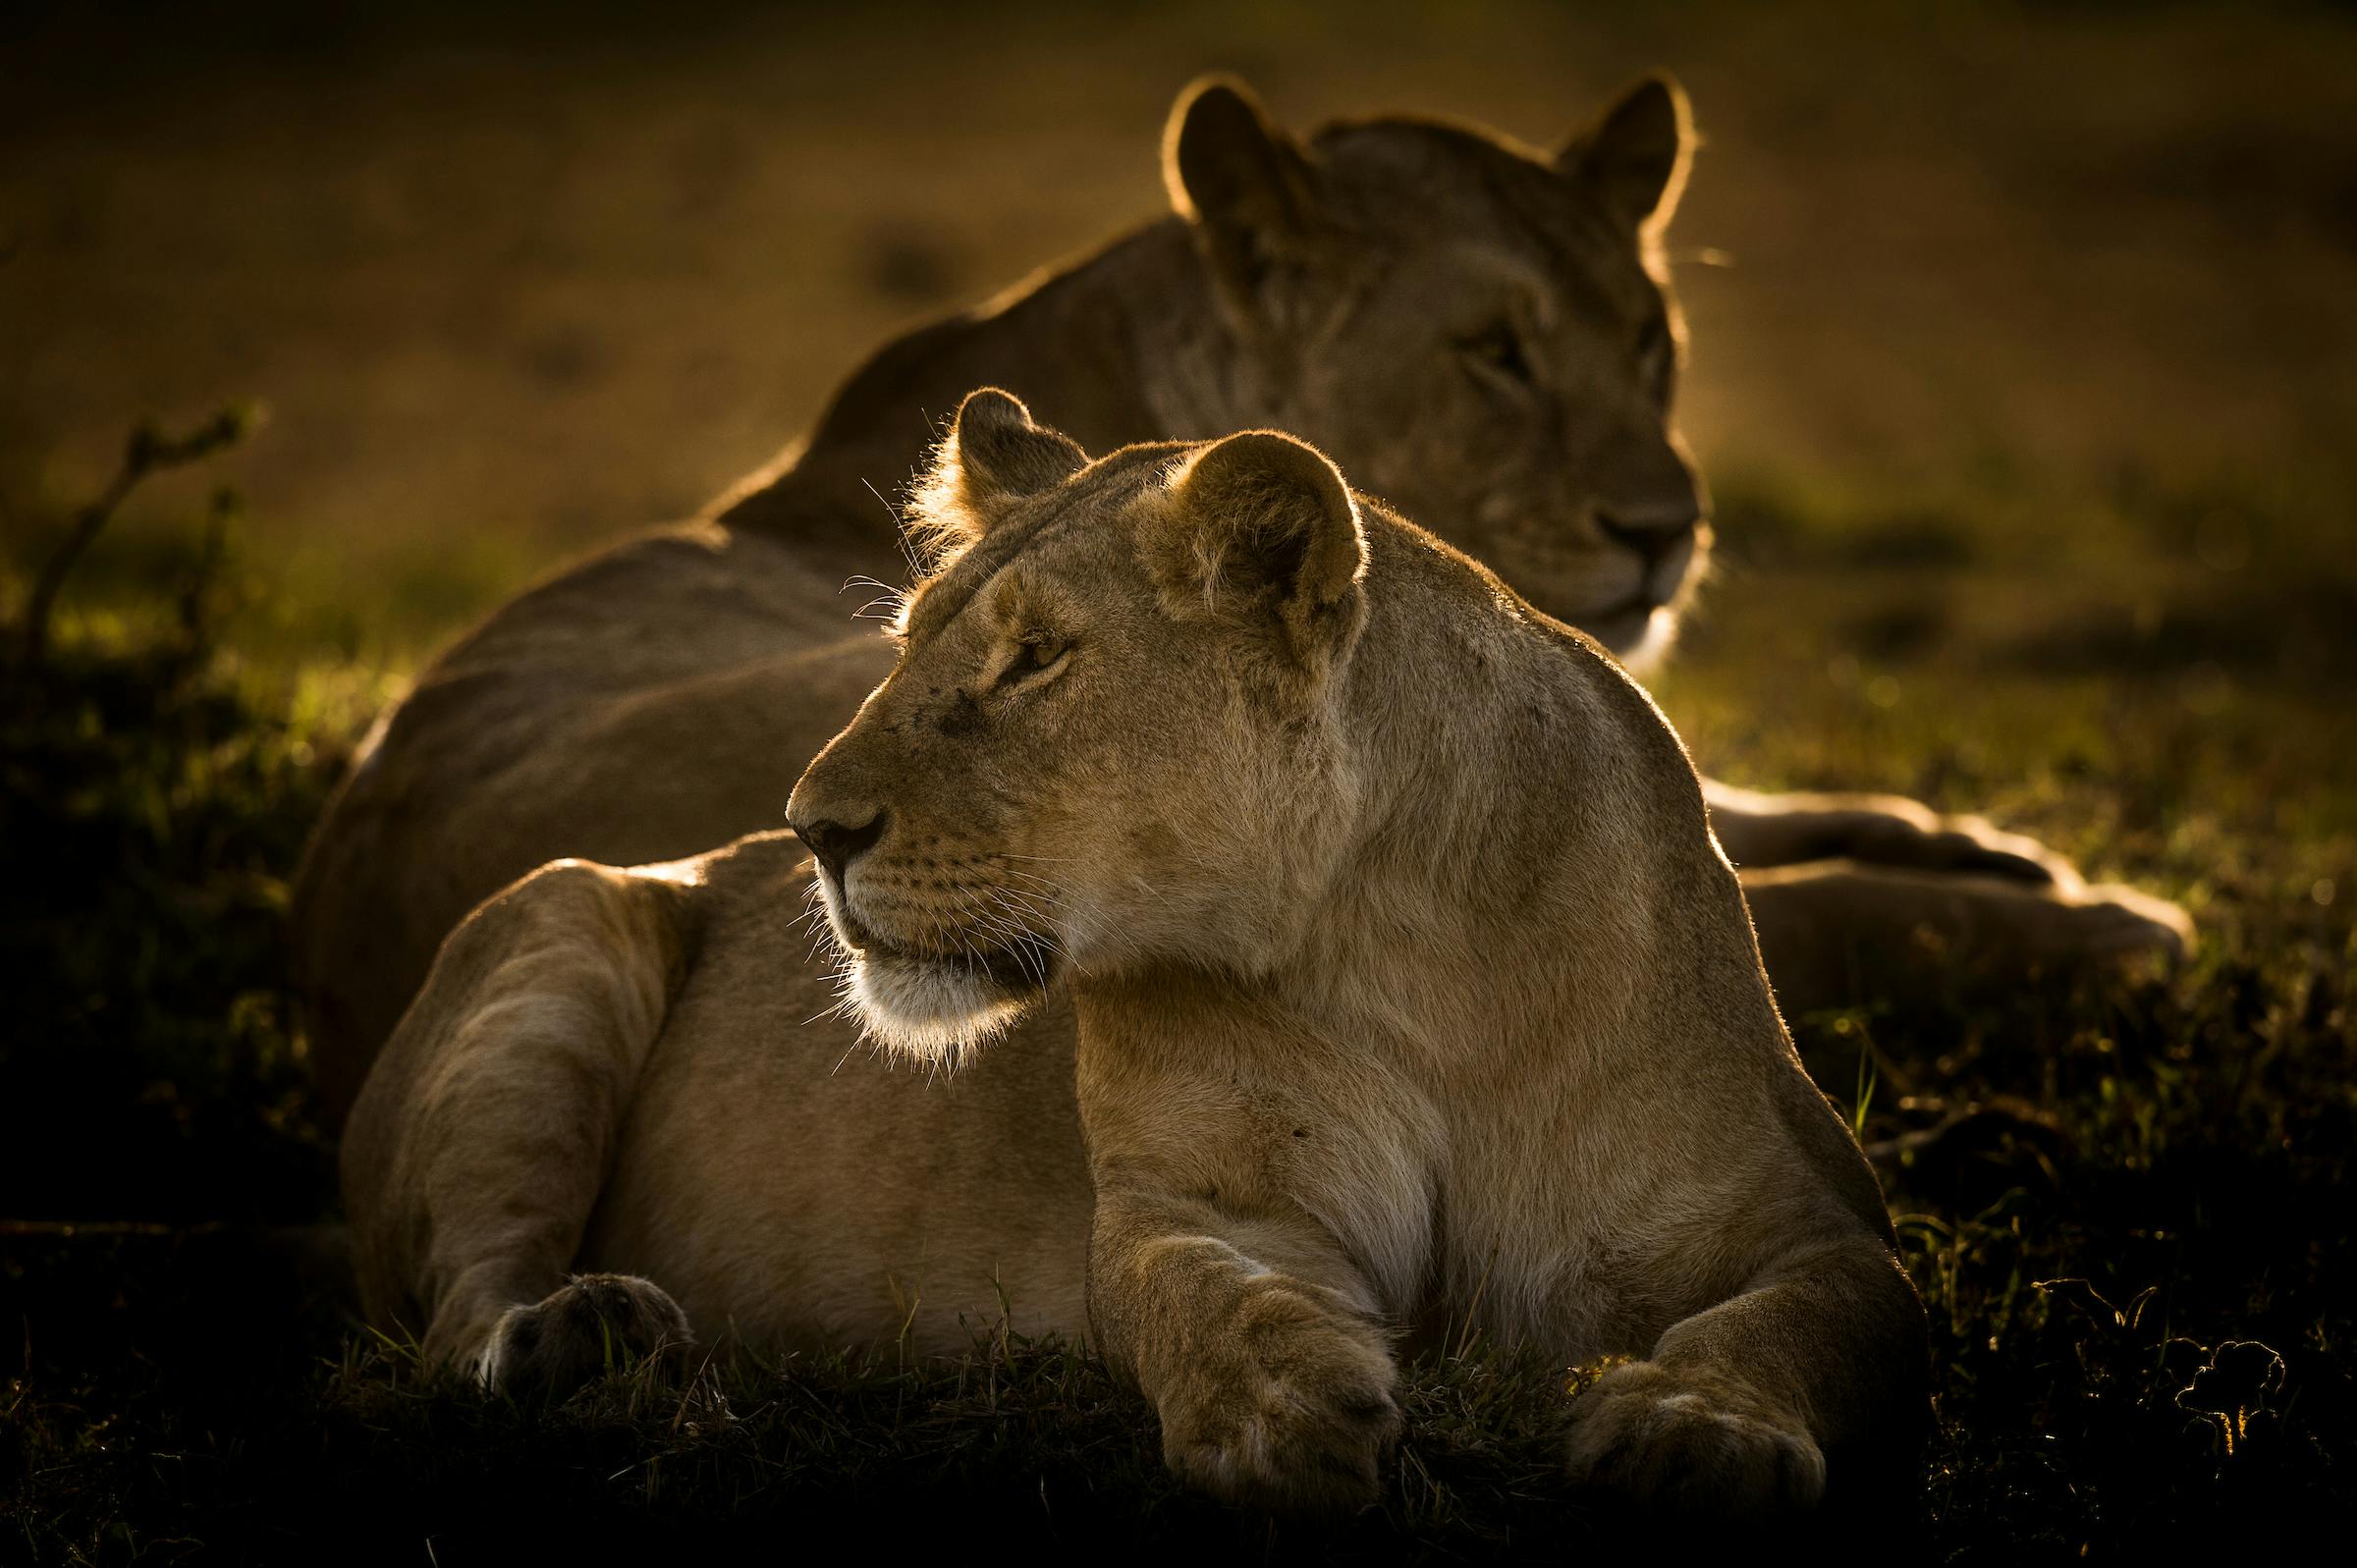 Recovering lions in Africa’s hyper-biodiverse heartlands